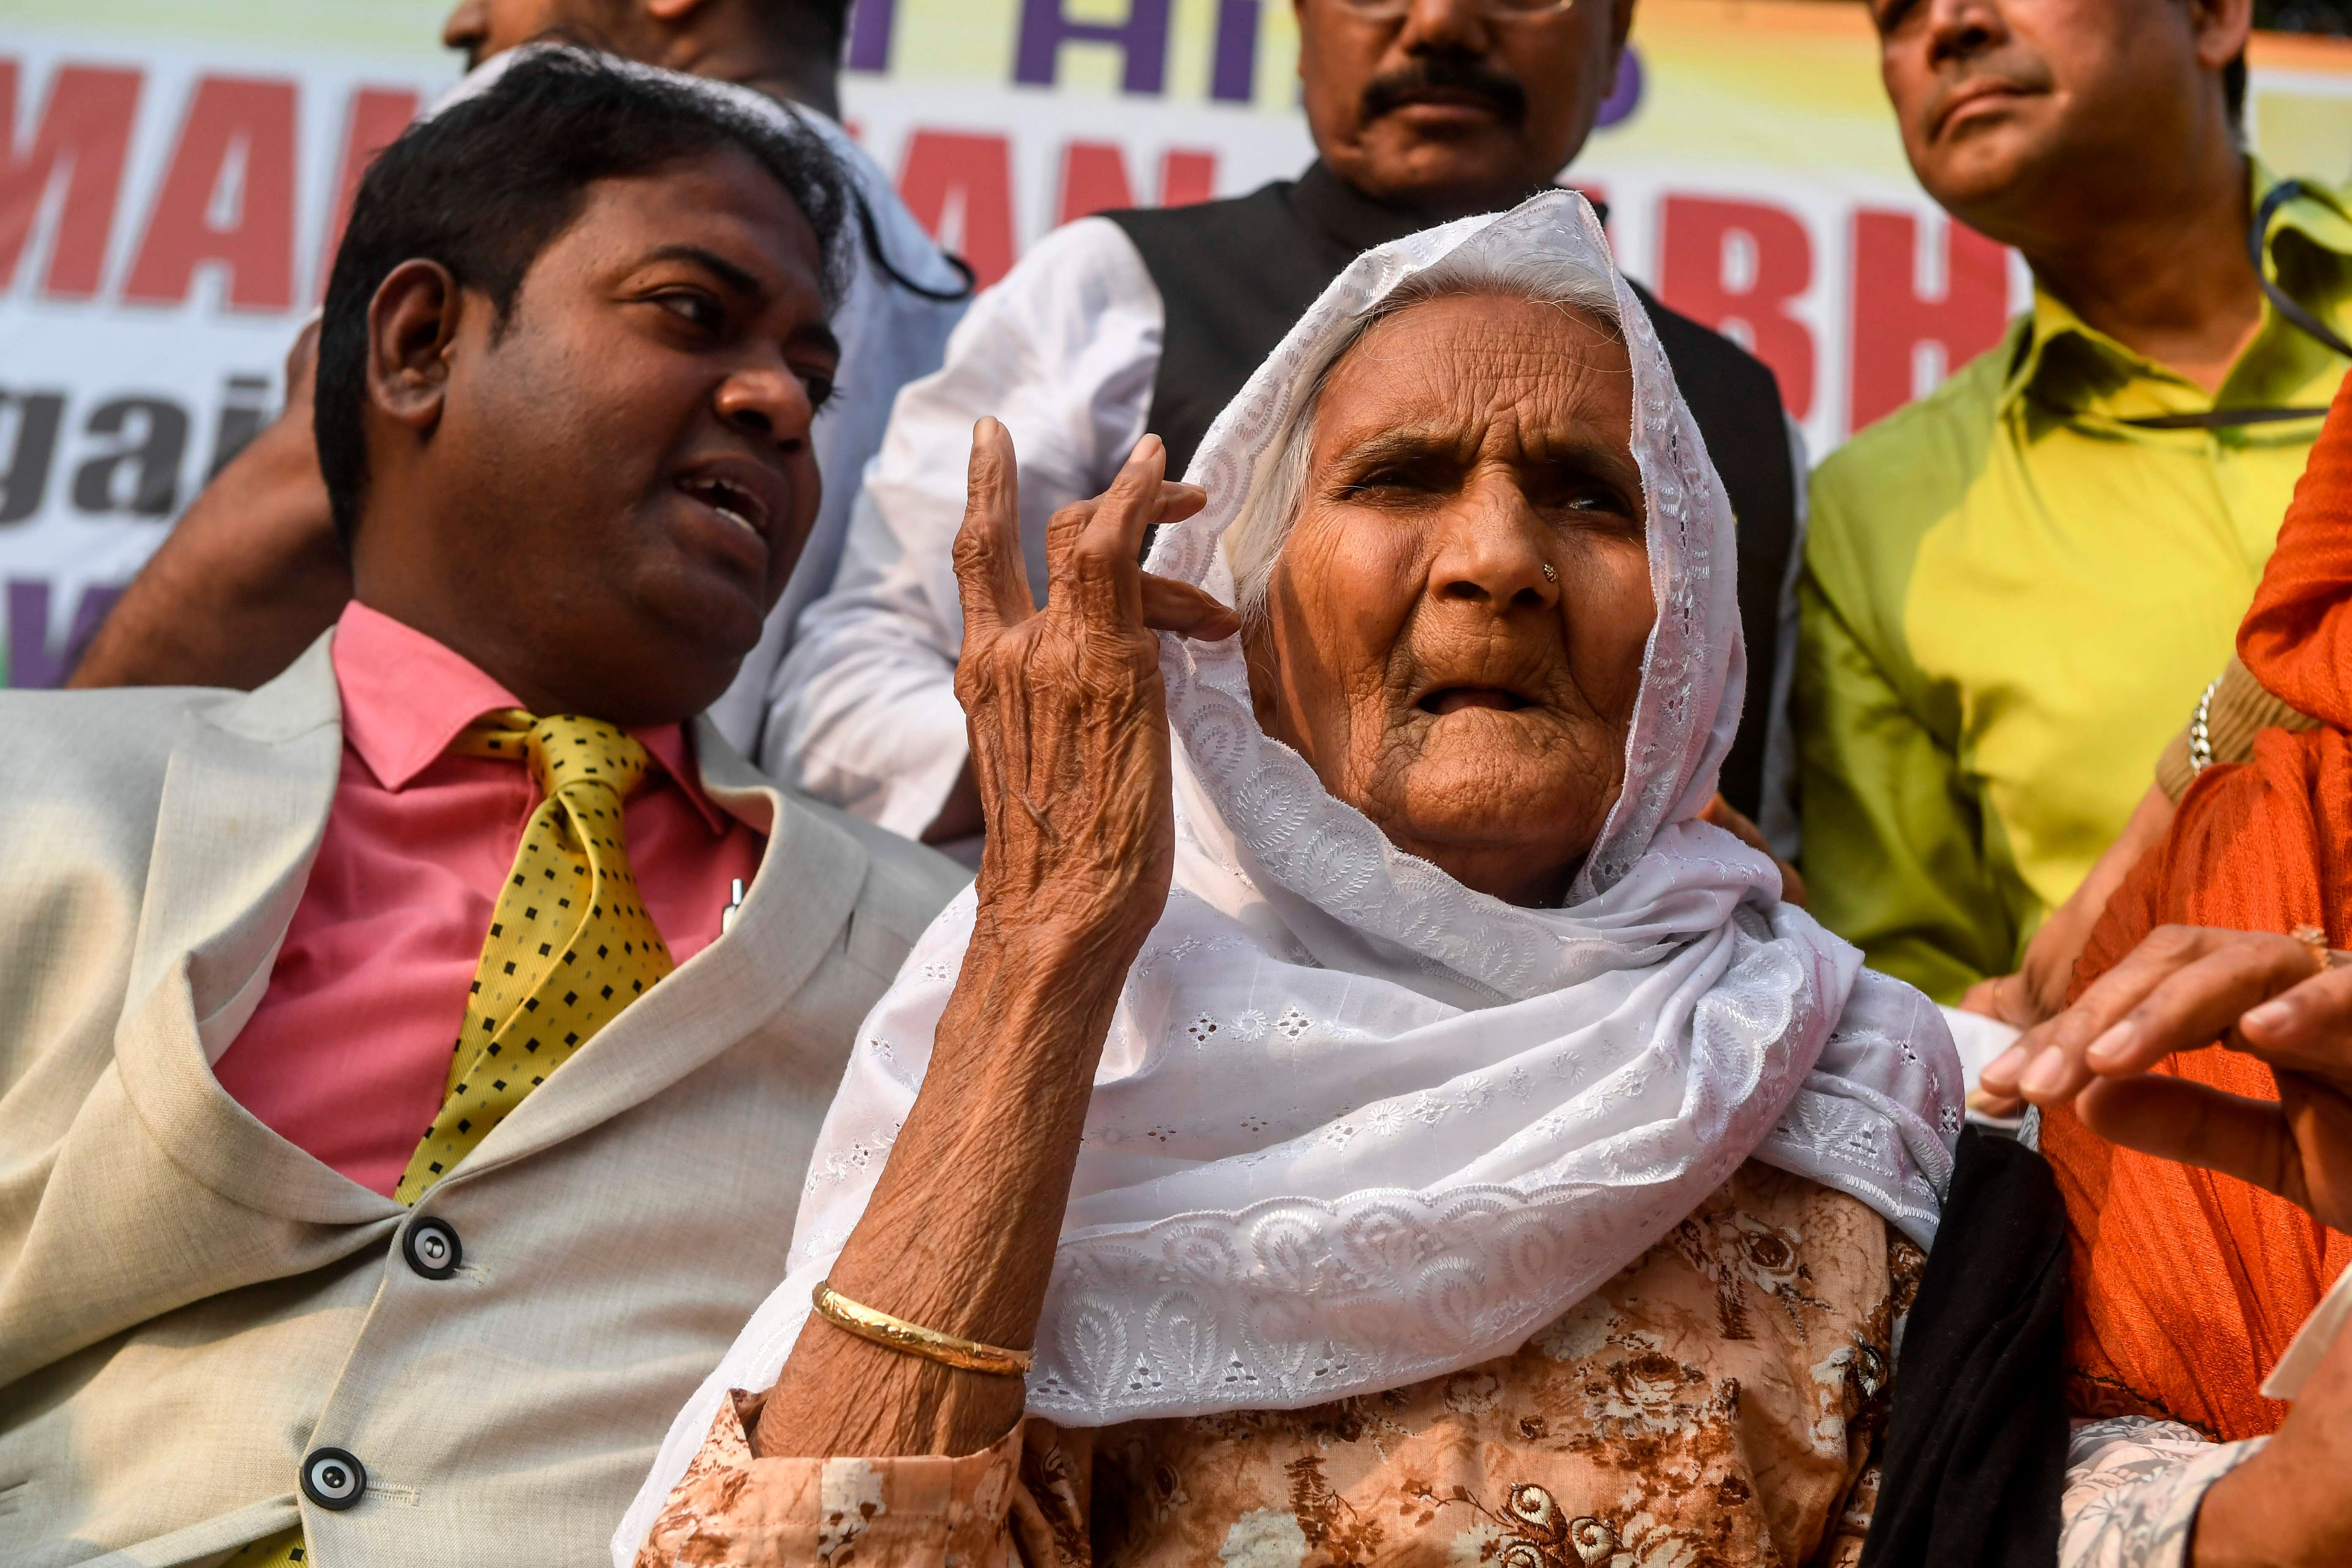 Shaheen Bagh's 'Dadi' (grandmother) Asma Khatoon (R), 90, and great grandson of B.R. Ambedkar, Rajratna Ambedkar (L), gesture as they protest against India's new citizenship law during a demonstration in Kolkata. (AFP Photo)